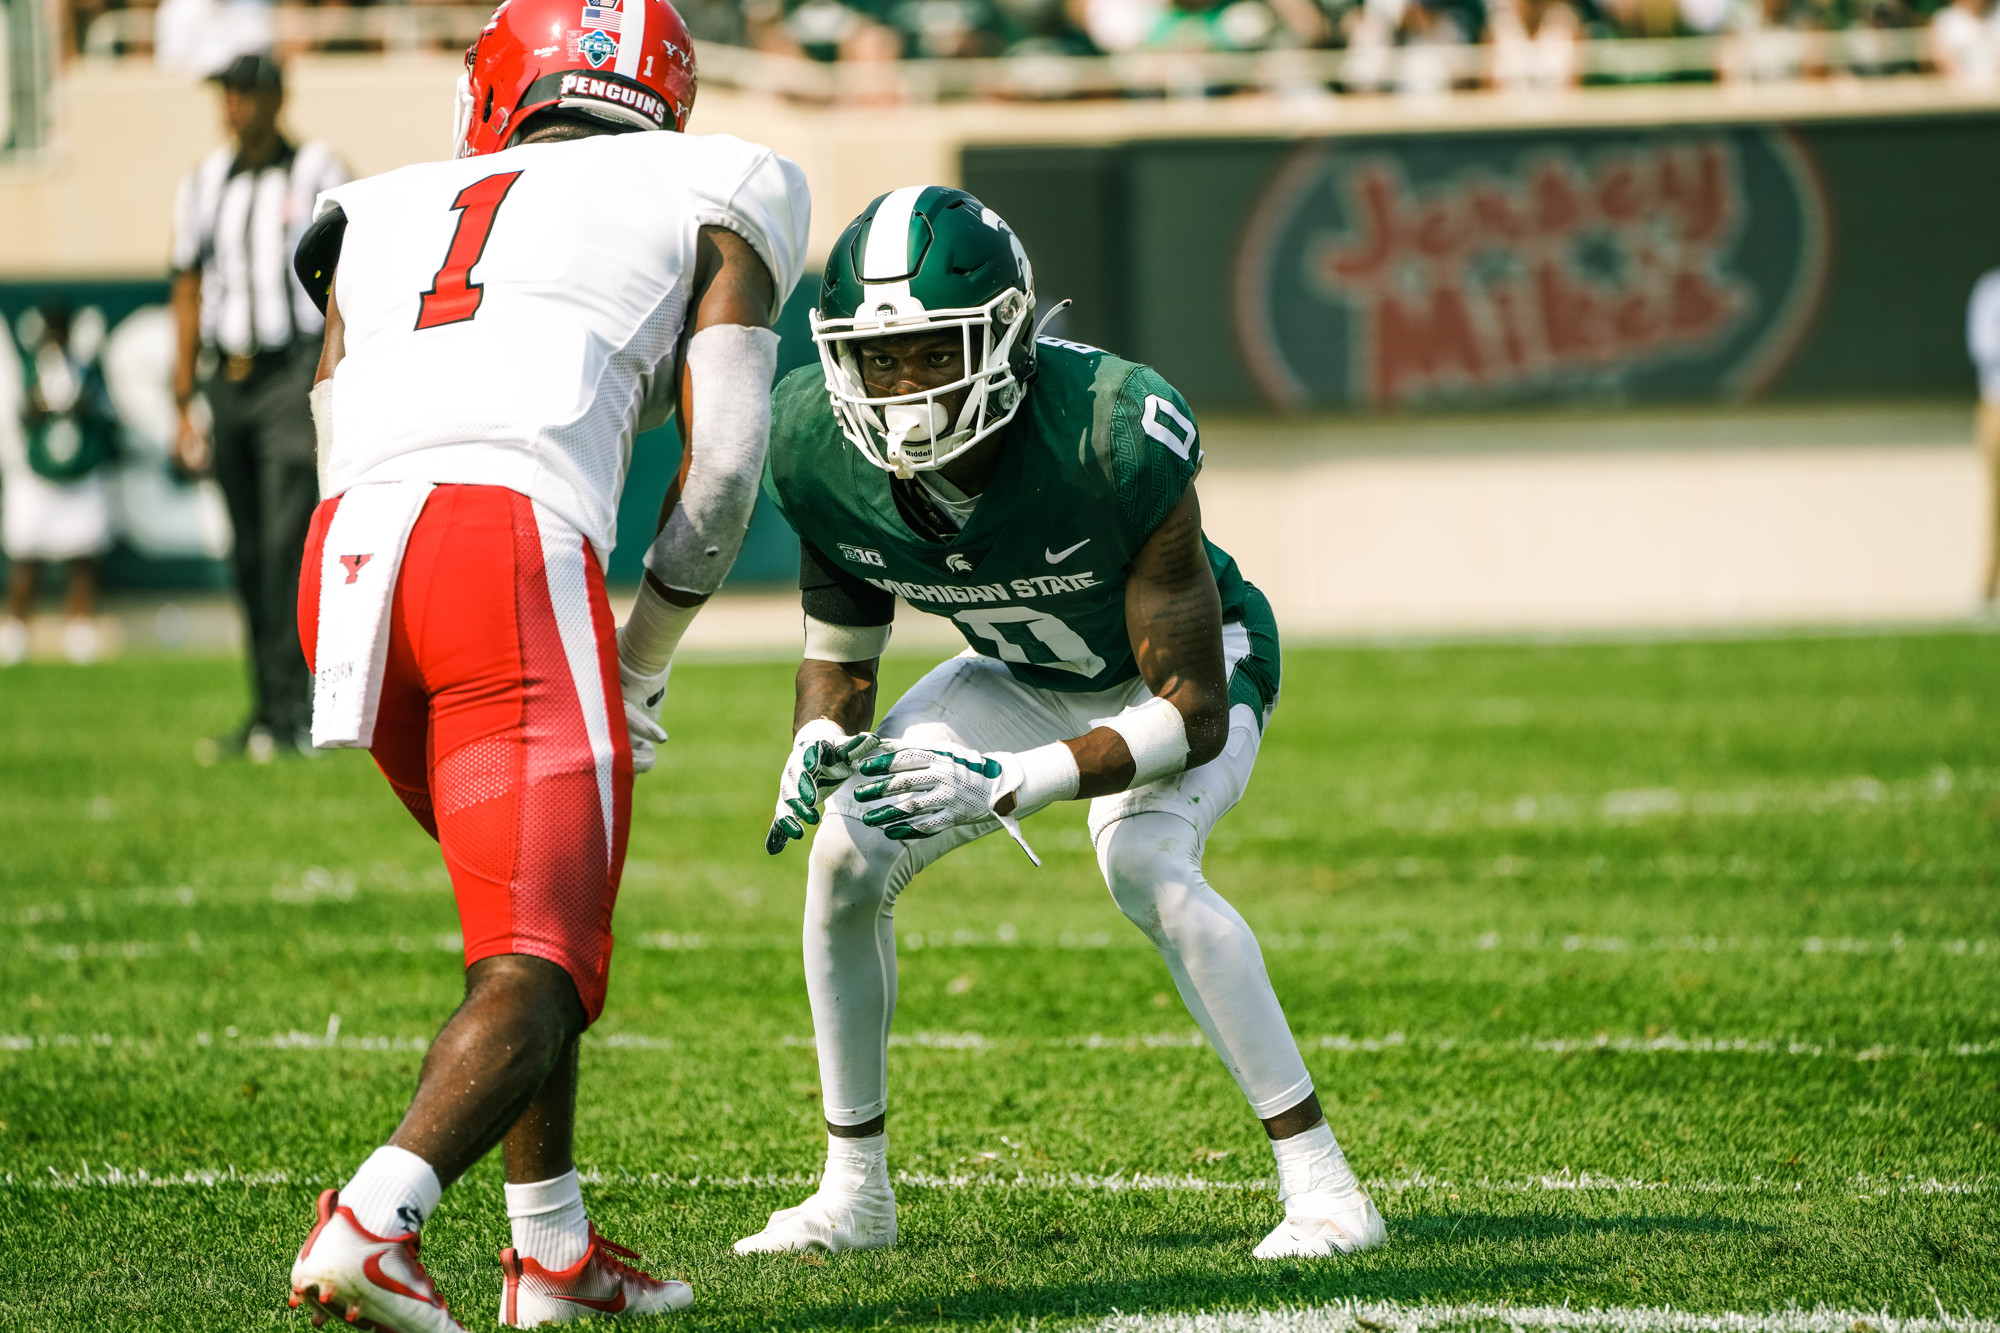 Charles Brantley (0) lines up against a Youngstown State wideout as a freshman in 2021. The former Riverview defensive back is a big part of the Spartan's defensive plan in 2022. (Photo courtesy of Michigan State Athletics.)